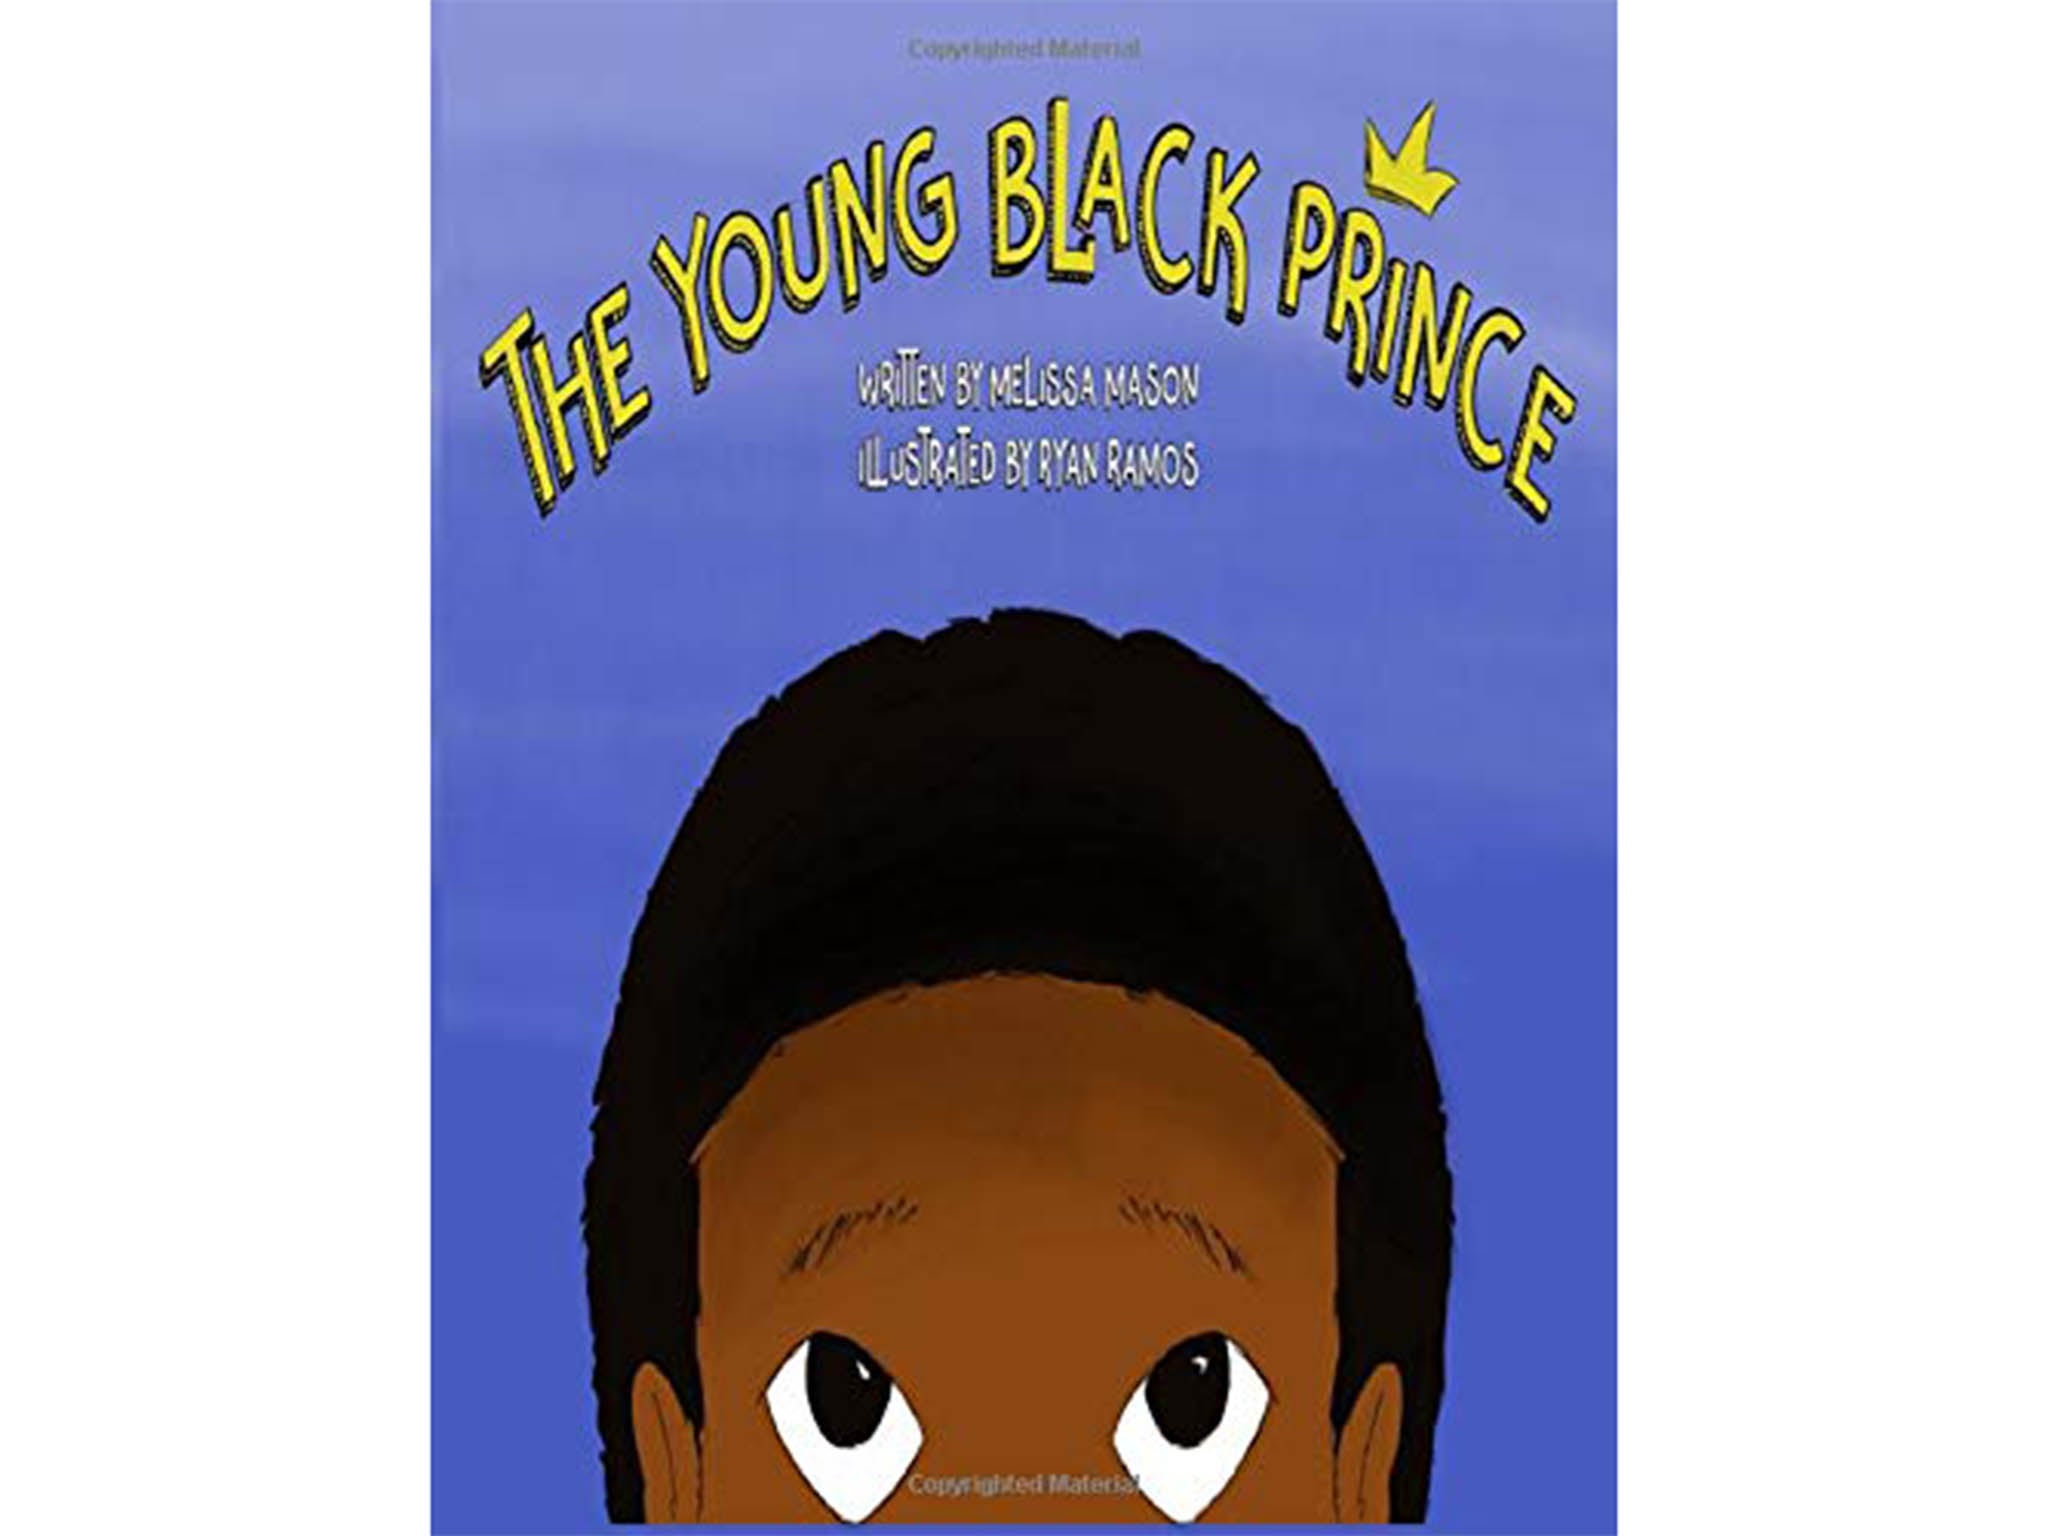 The Young Black Prince by Melissa Mason indybest.jpg